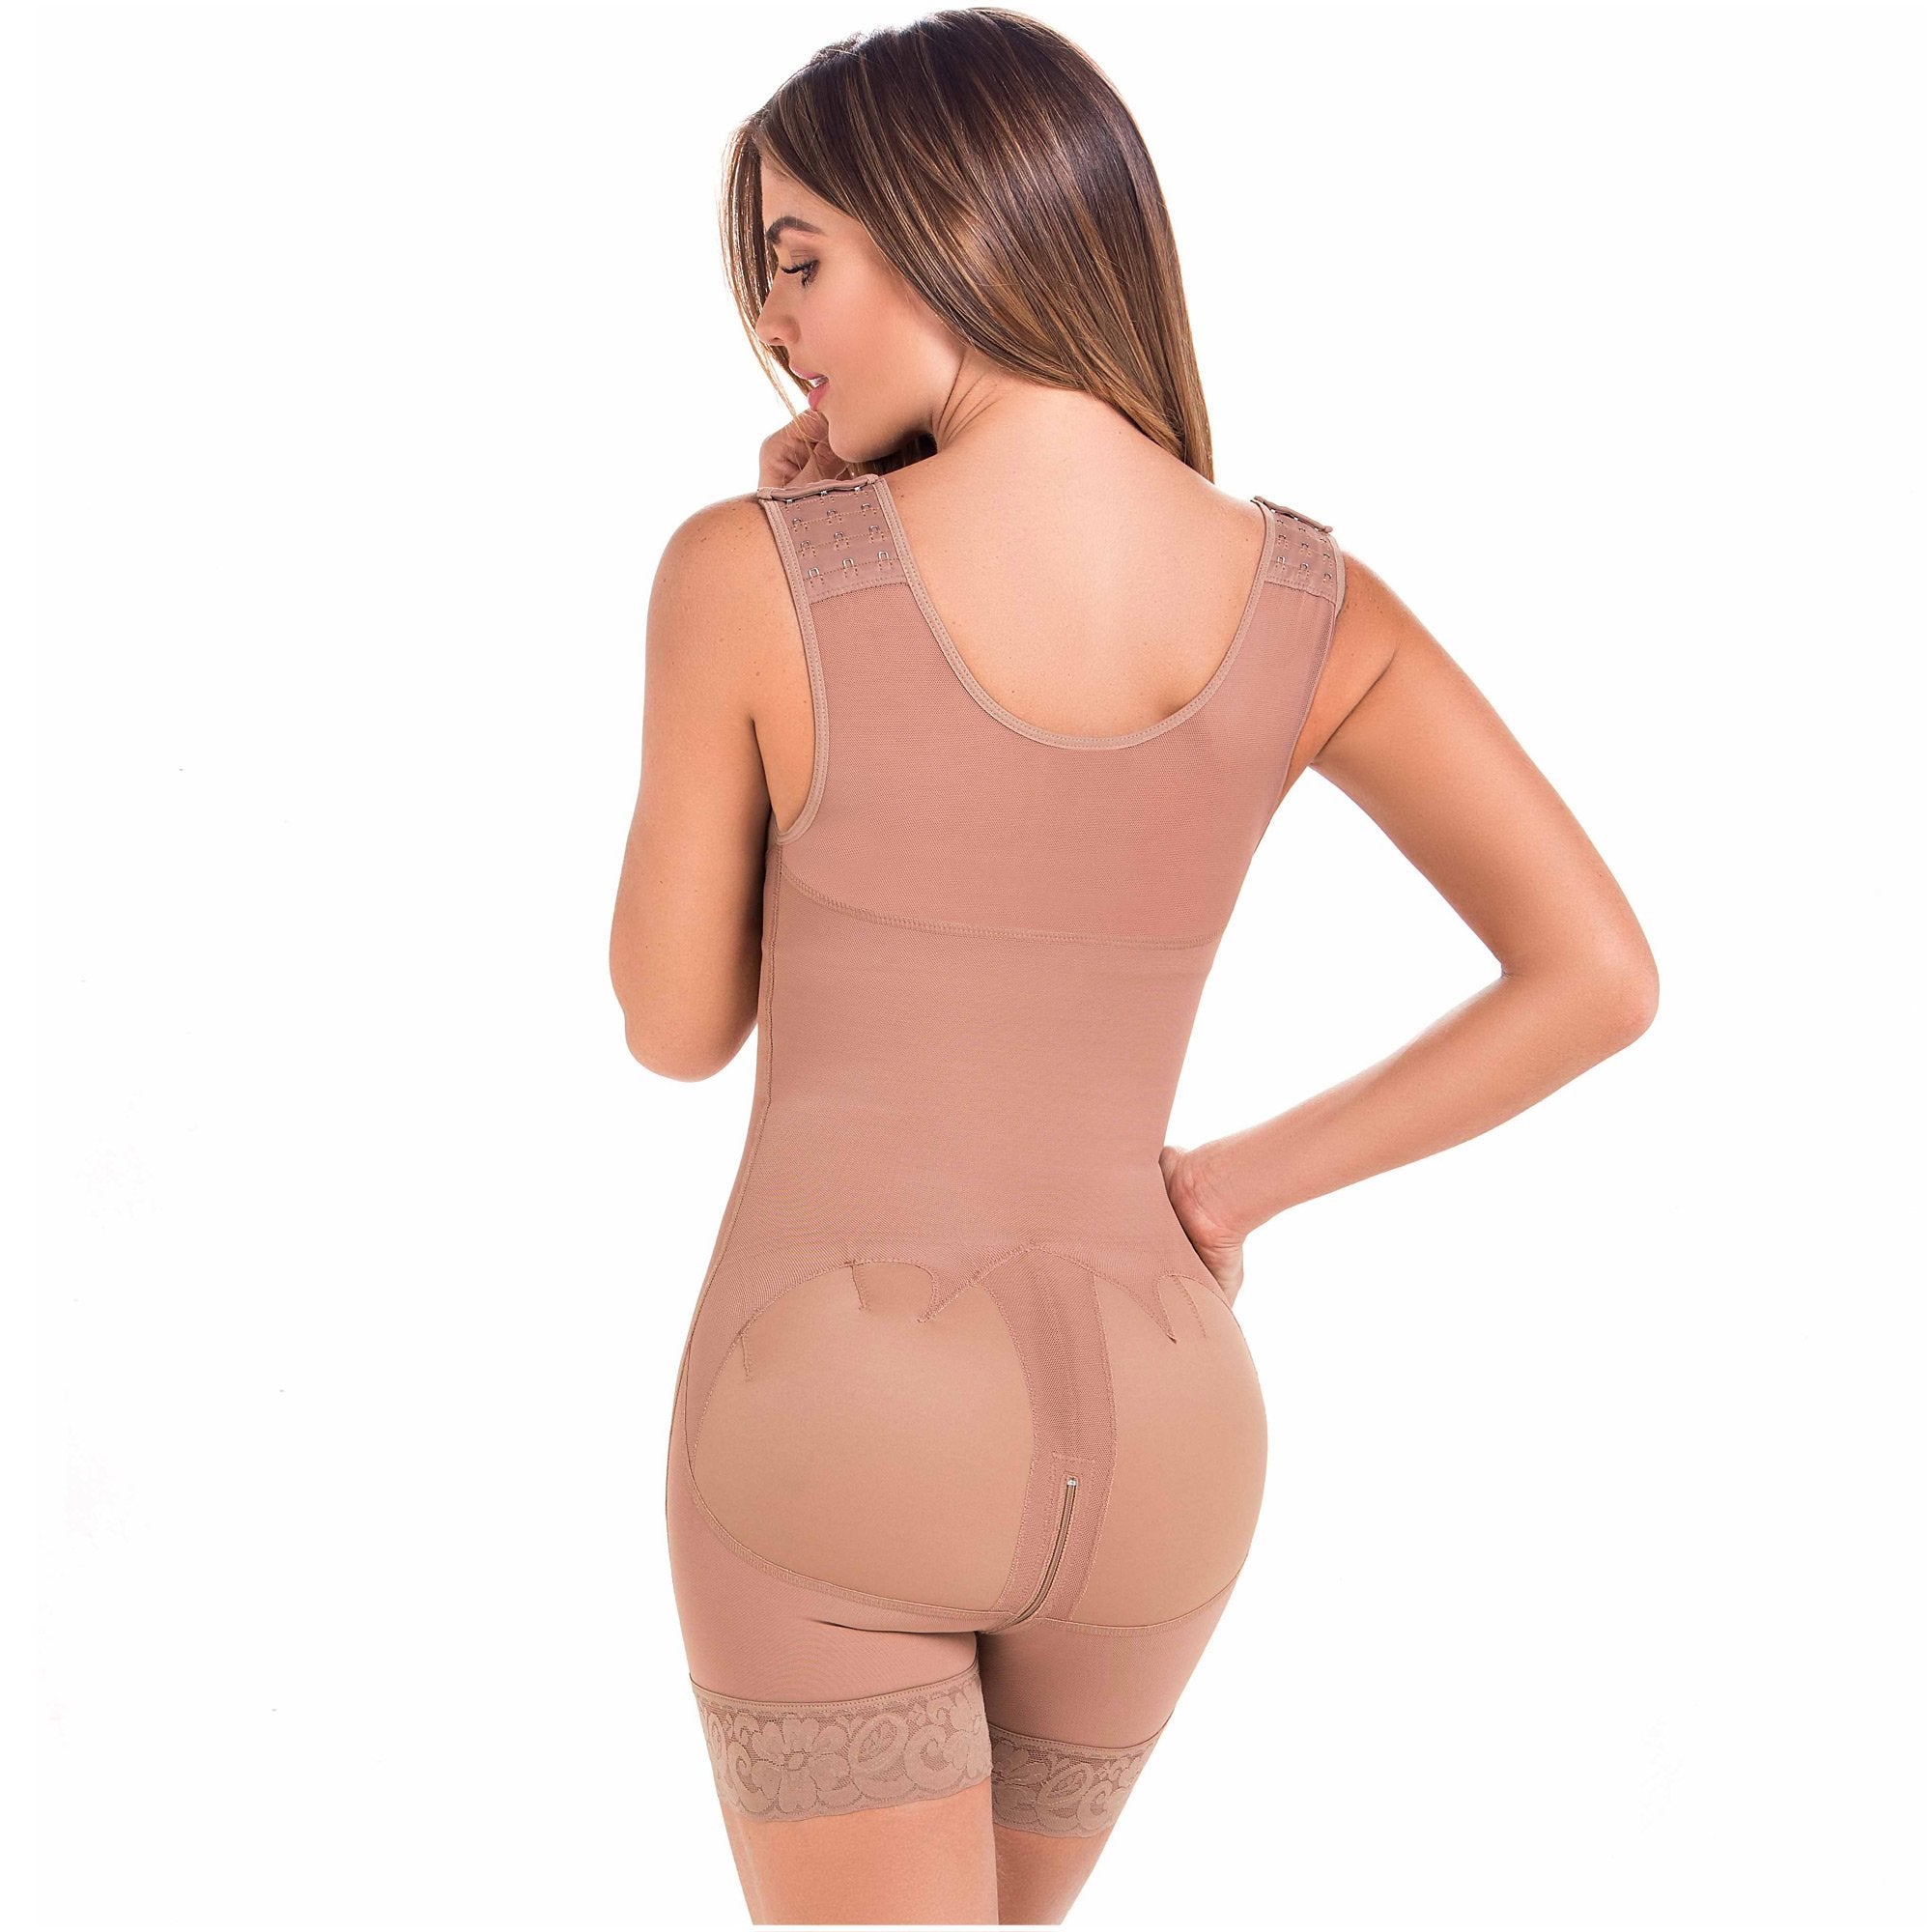 Fajas MariaE FQ105 Colombian Mid-Thigh Shapewear with Over Bust Strap - New England Supplier